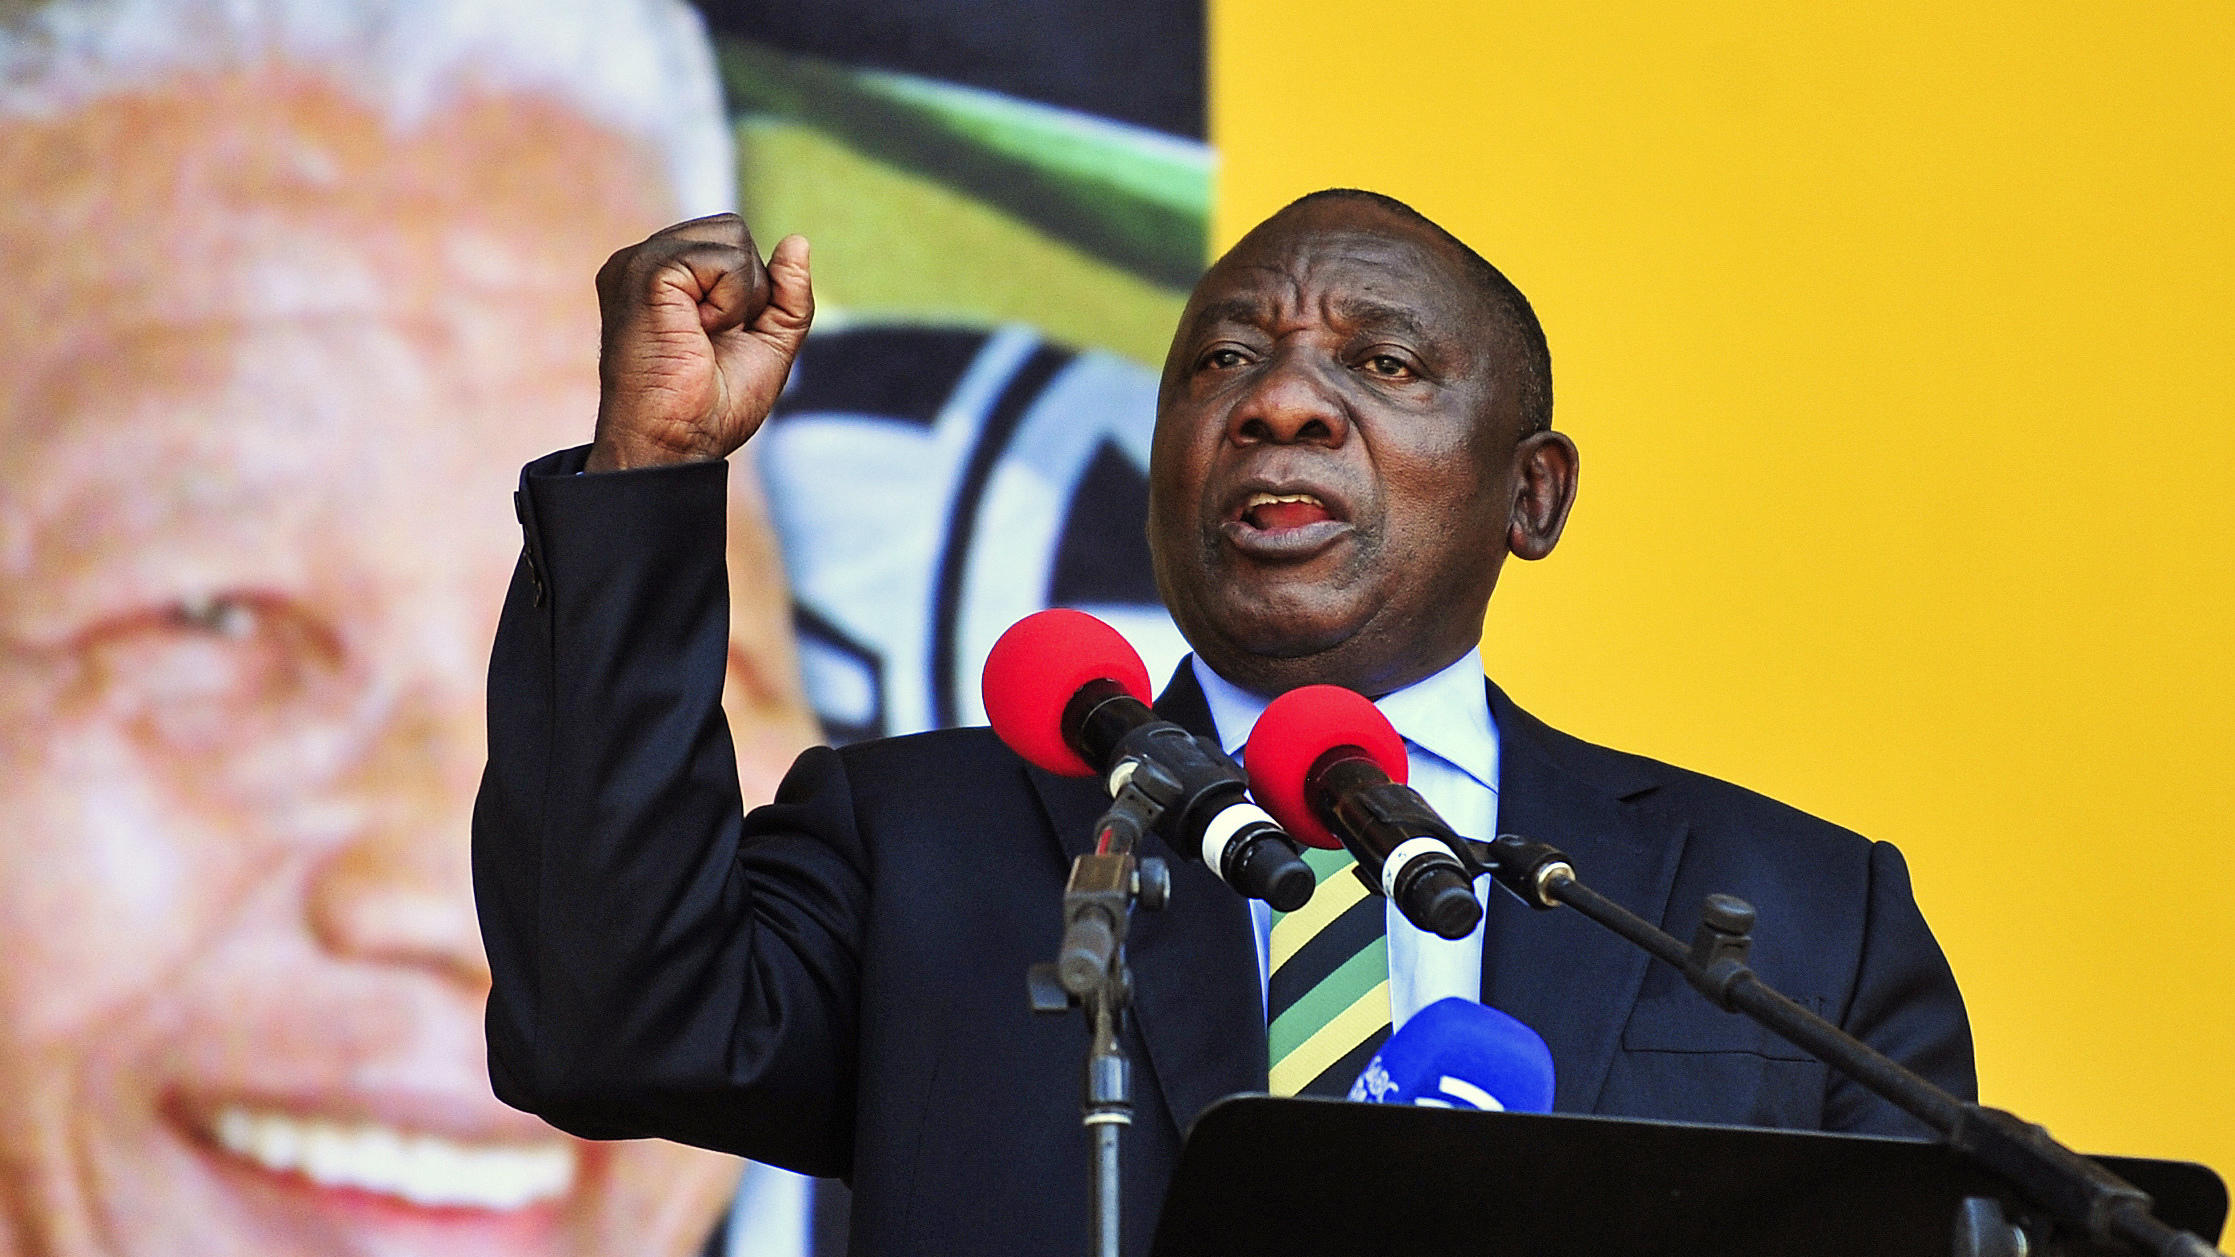 South Africa: President Cyril Ramaphosa Set to be Impeached